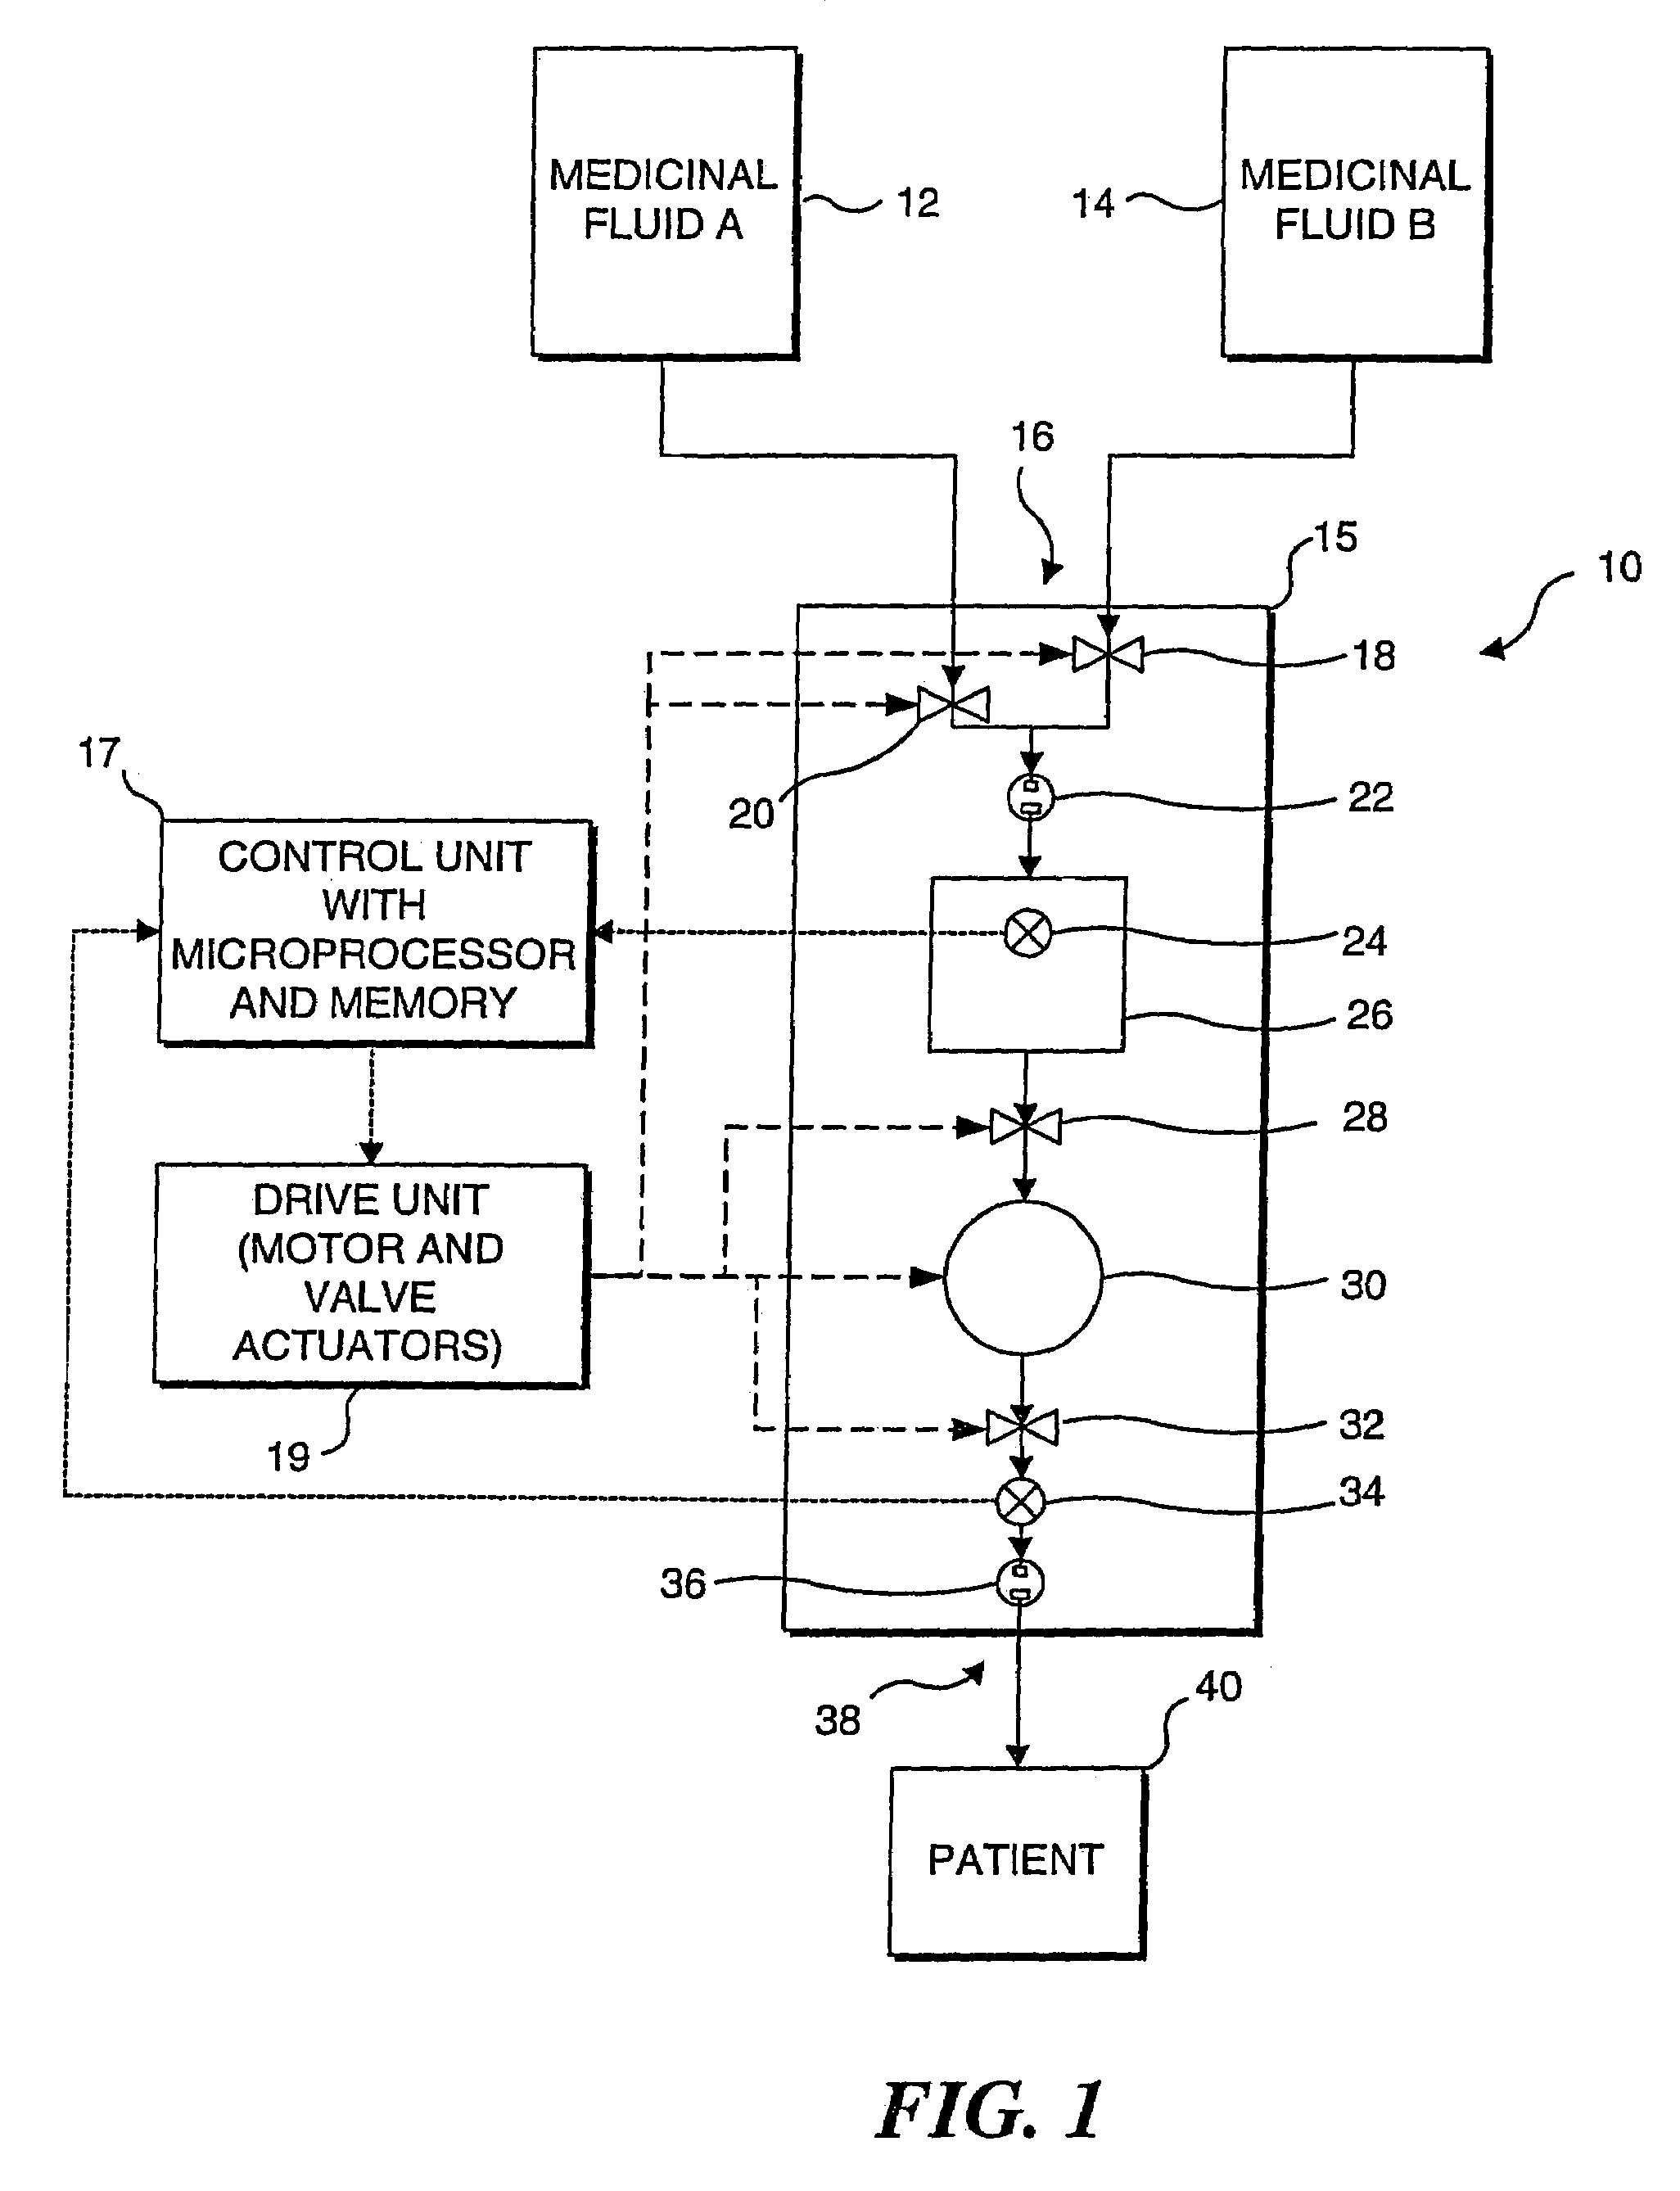 Method for compensating for pressure differences across valves in cassette type IV pump